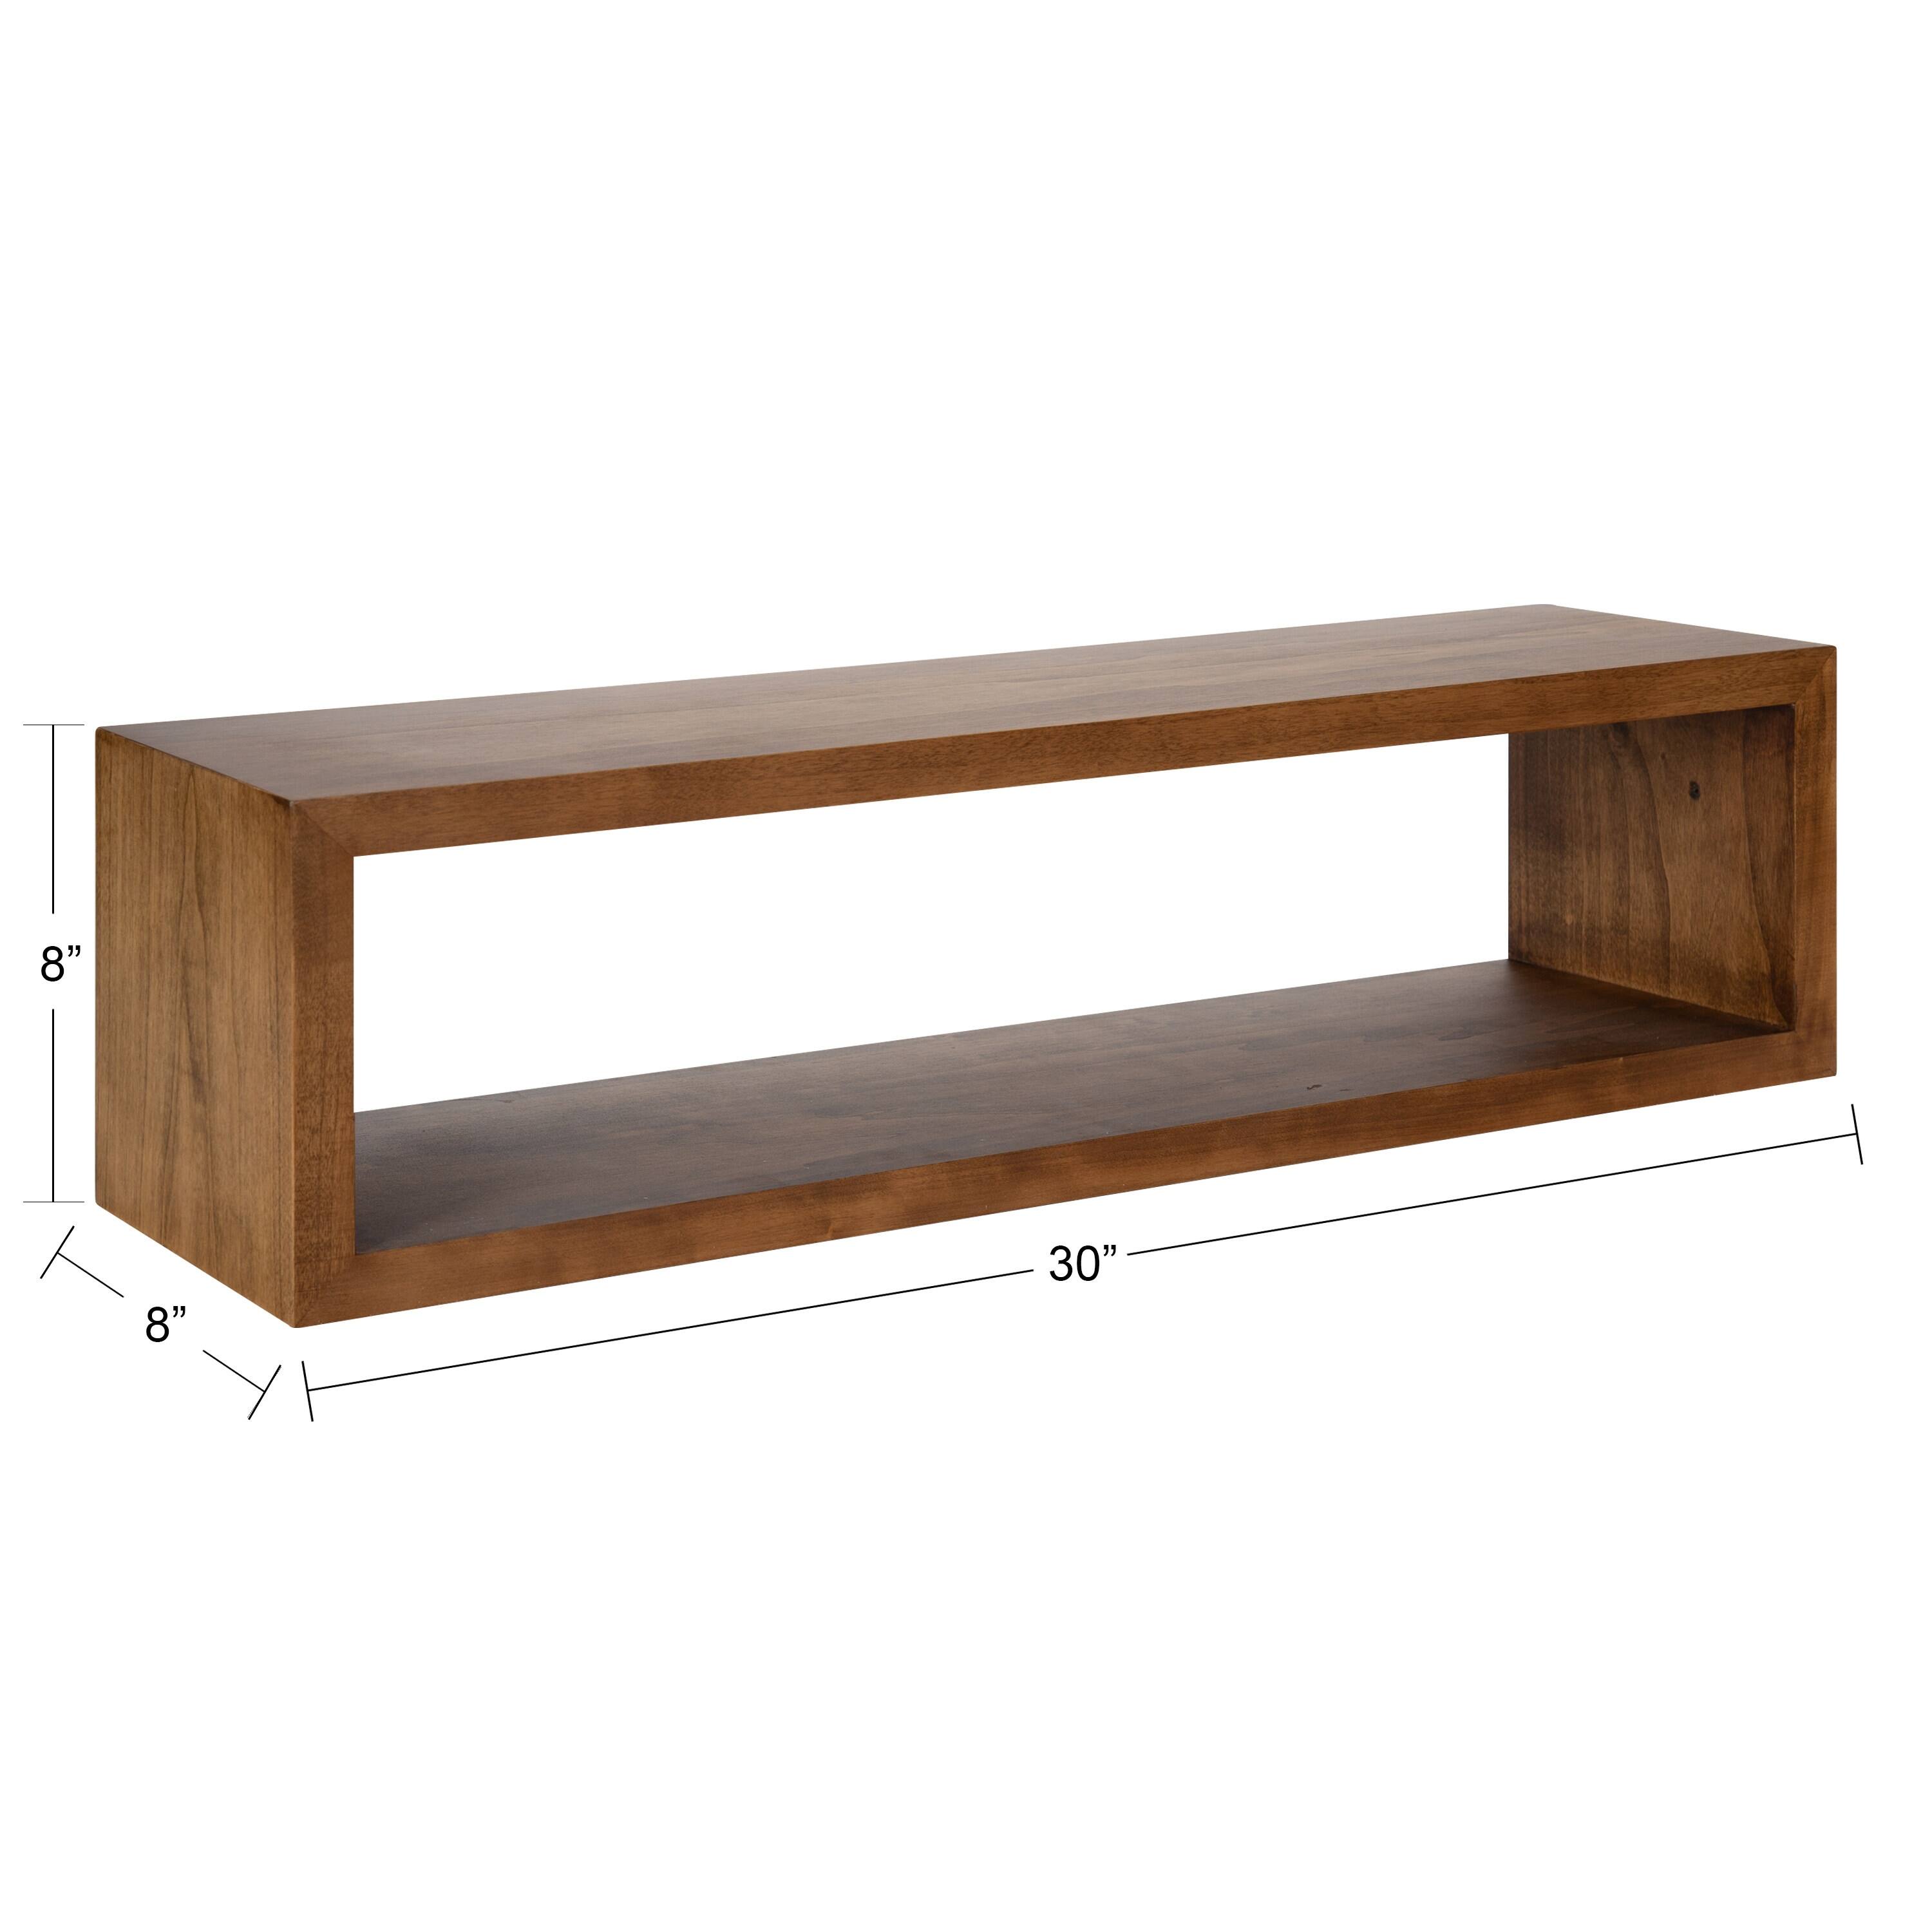 Kate and Laurel Holt Open Cubby Wooden Floating Wall Shelf